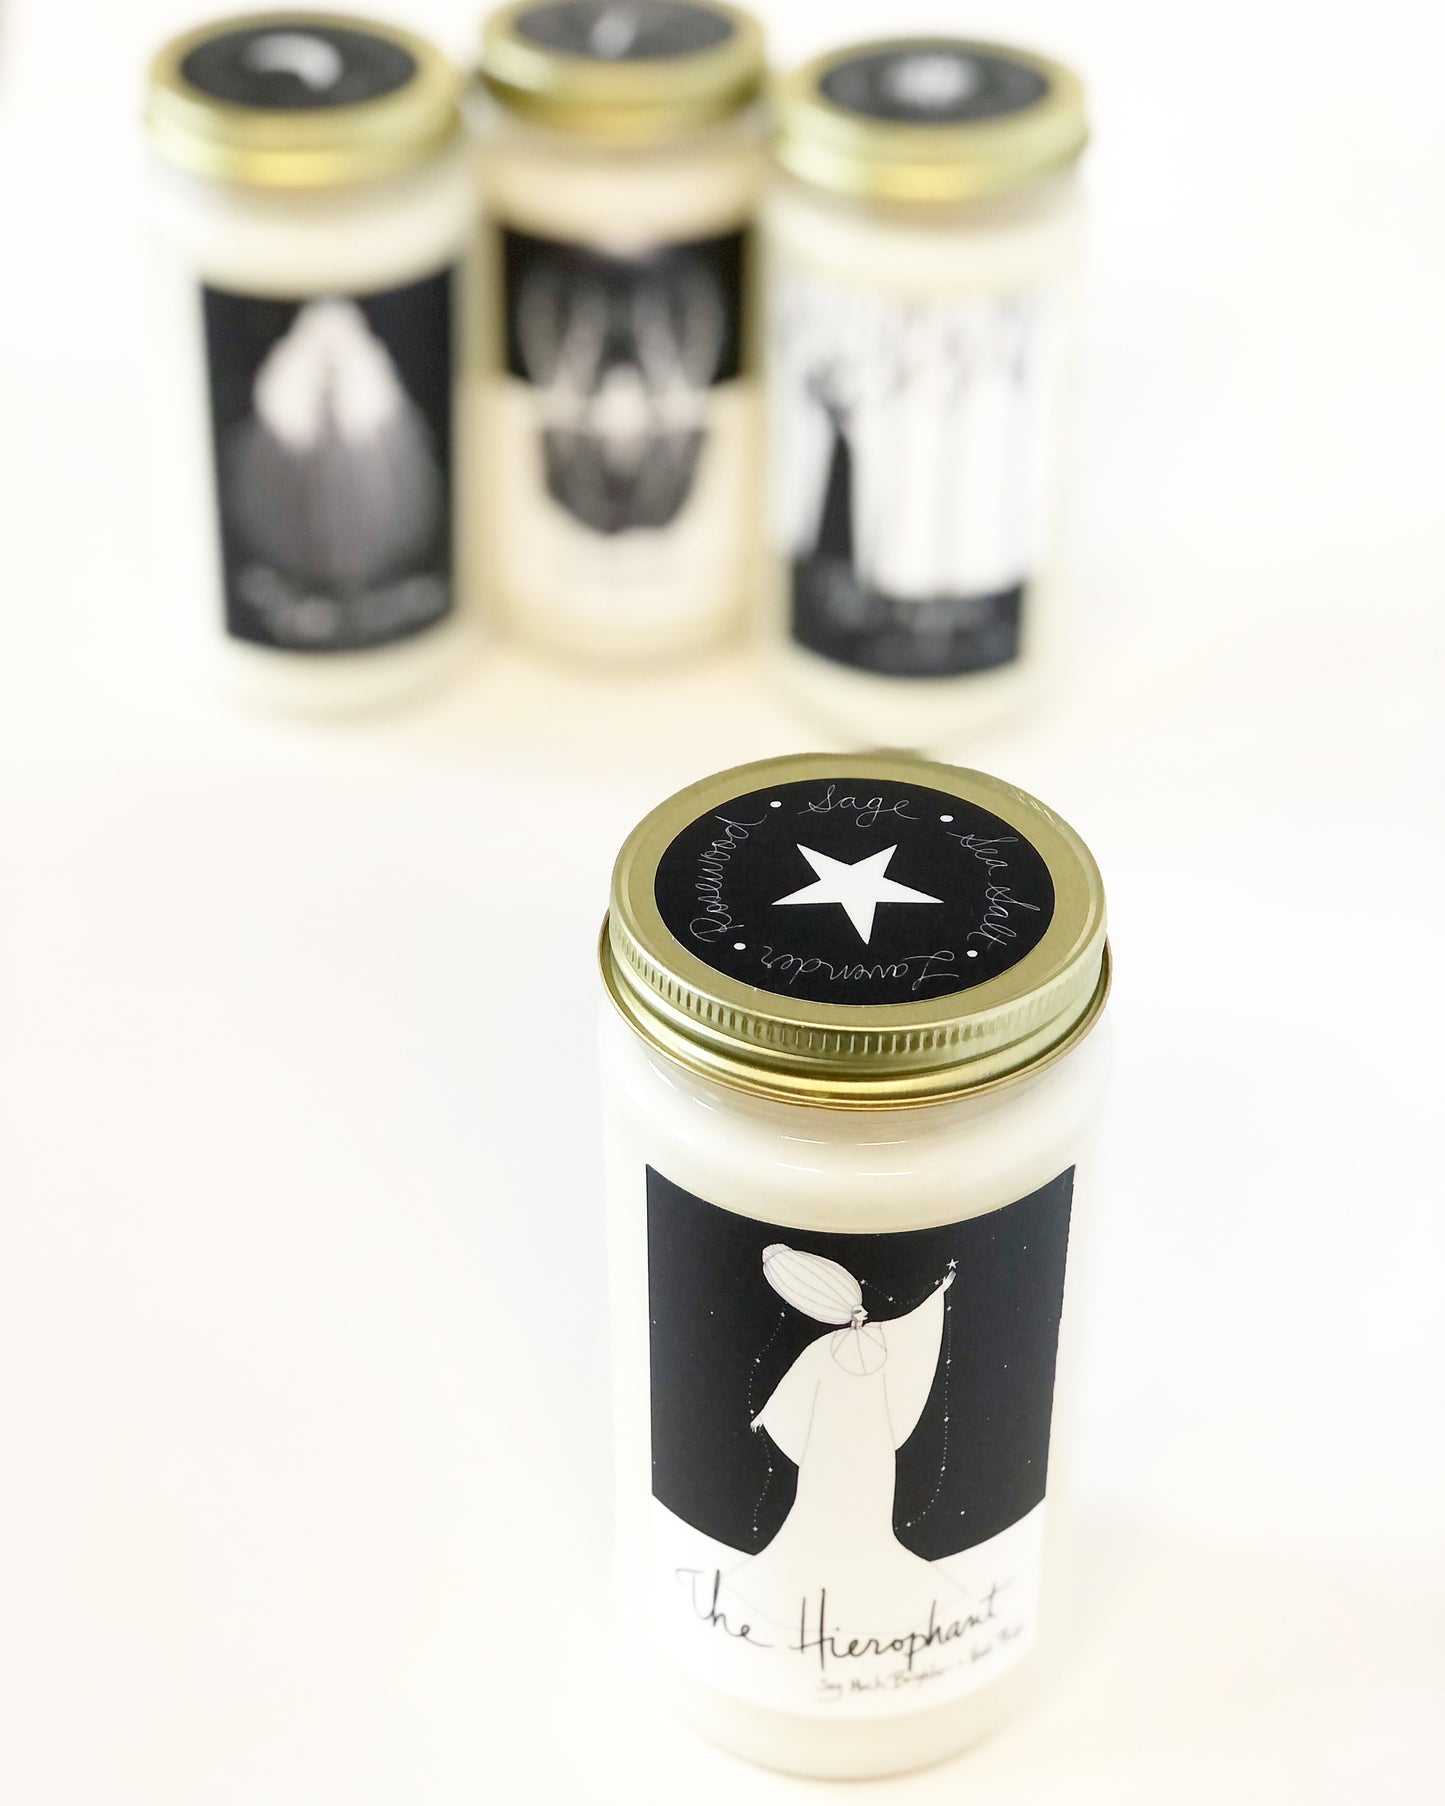 The Hierophant: Soy Candle collection from Soy Much Brighter